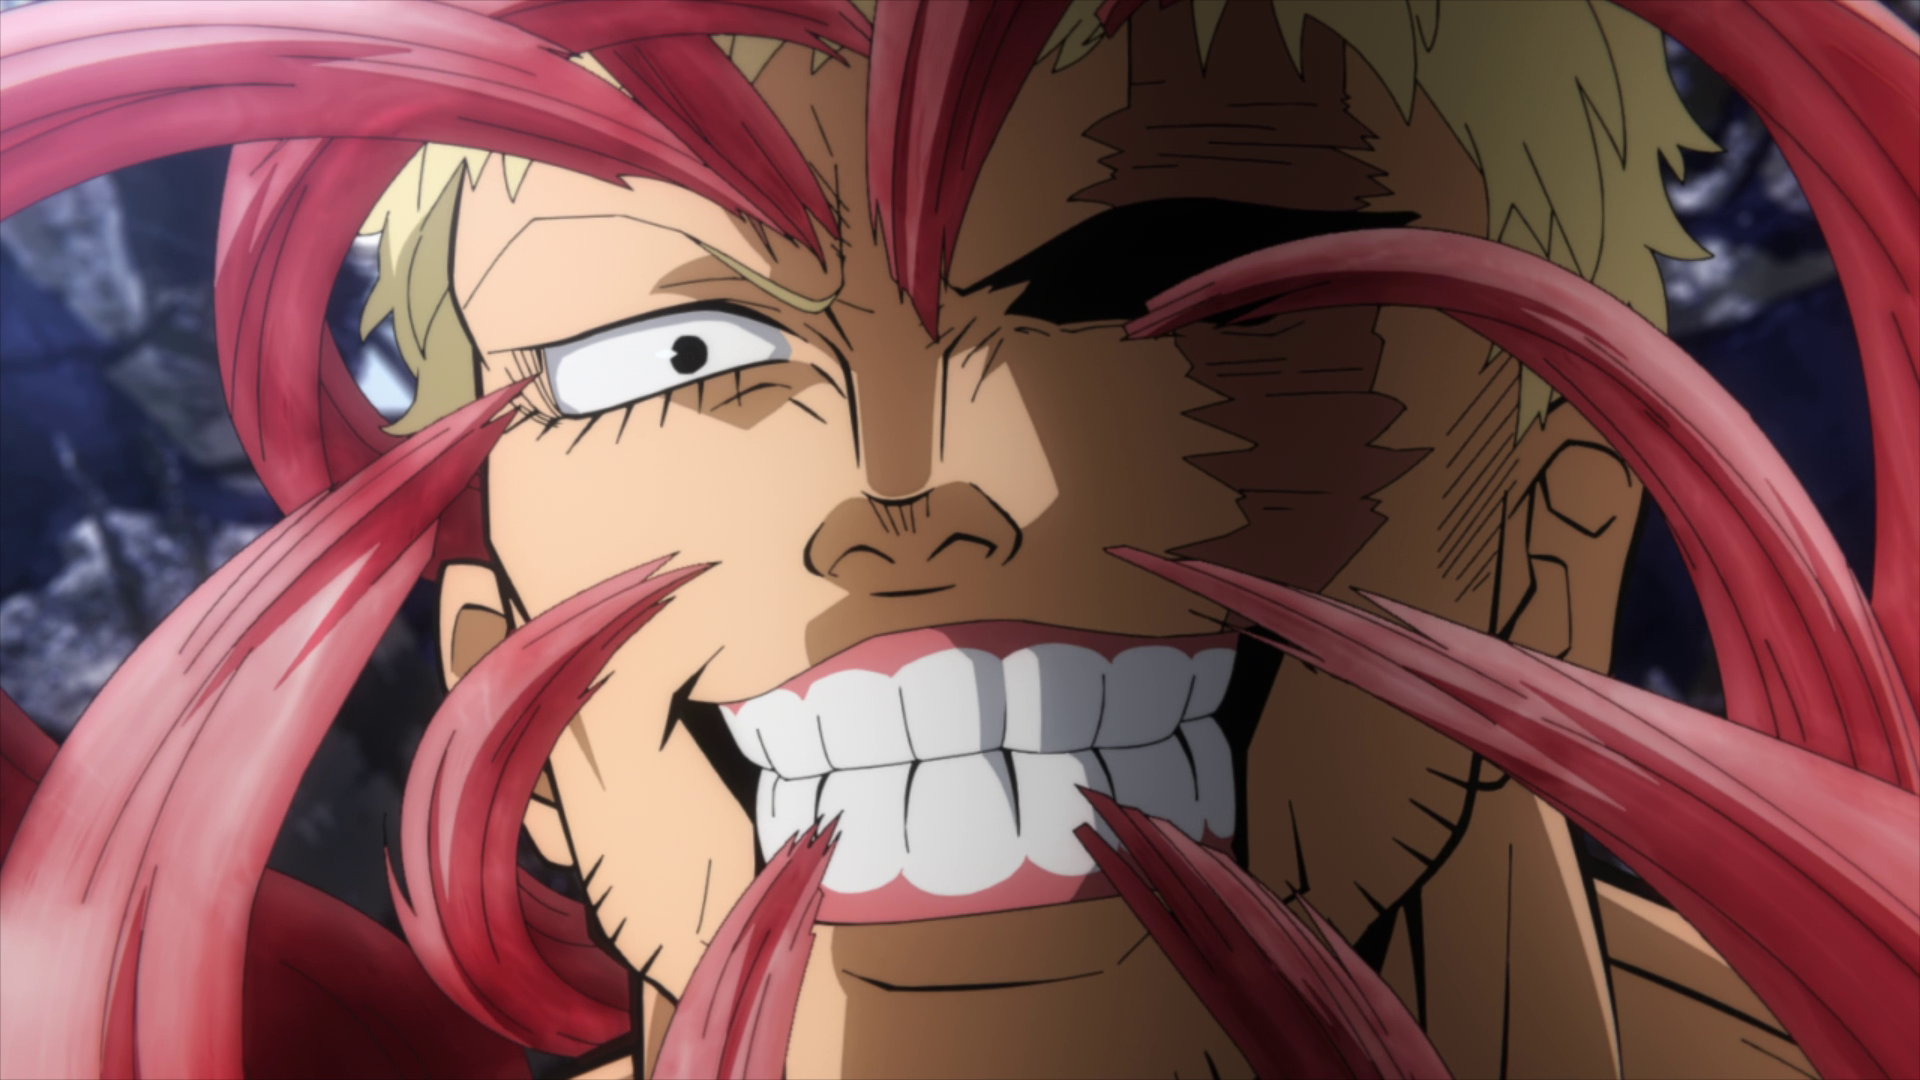 My Hero Academia - Laugh! As If You Are in Hell, My Hero Academia Wiki